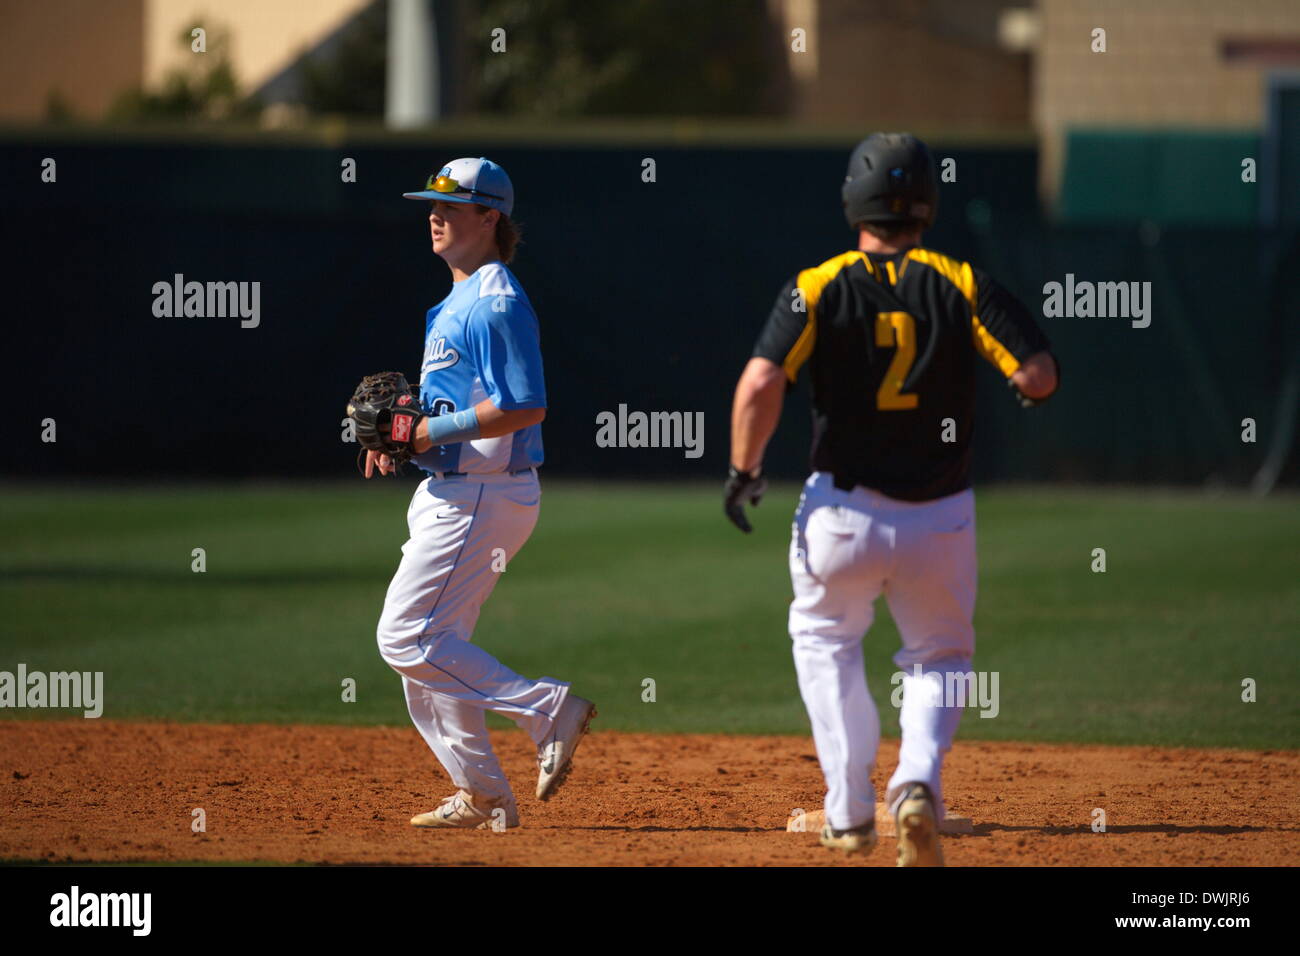 Kennesaw, Georgia, USA.  March 8, 2014 -- Columbia secondbaseman Kyle Bartelman (6) during Saturday's doubleheader between Columbia University and Kennesaw State University. The teams split the doubleheader.  Columbia one the first game 9-3.  KSU won the night cap 15-1. Credit:  Wayne Hughes | Alamy Live News Stock Photo